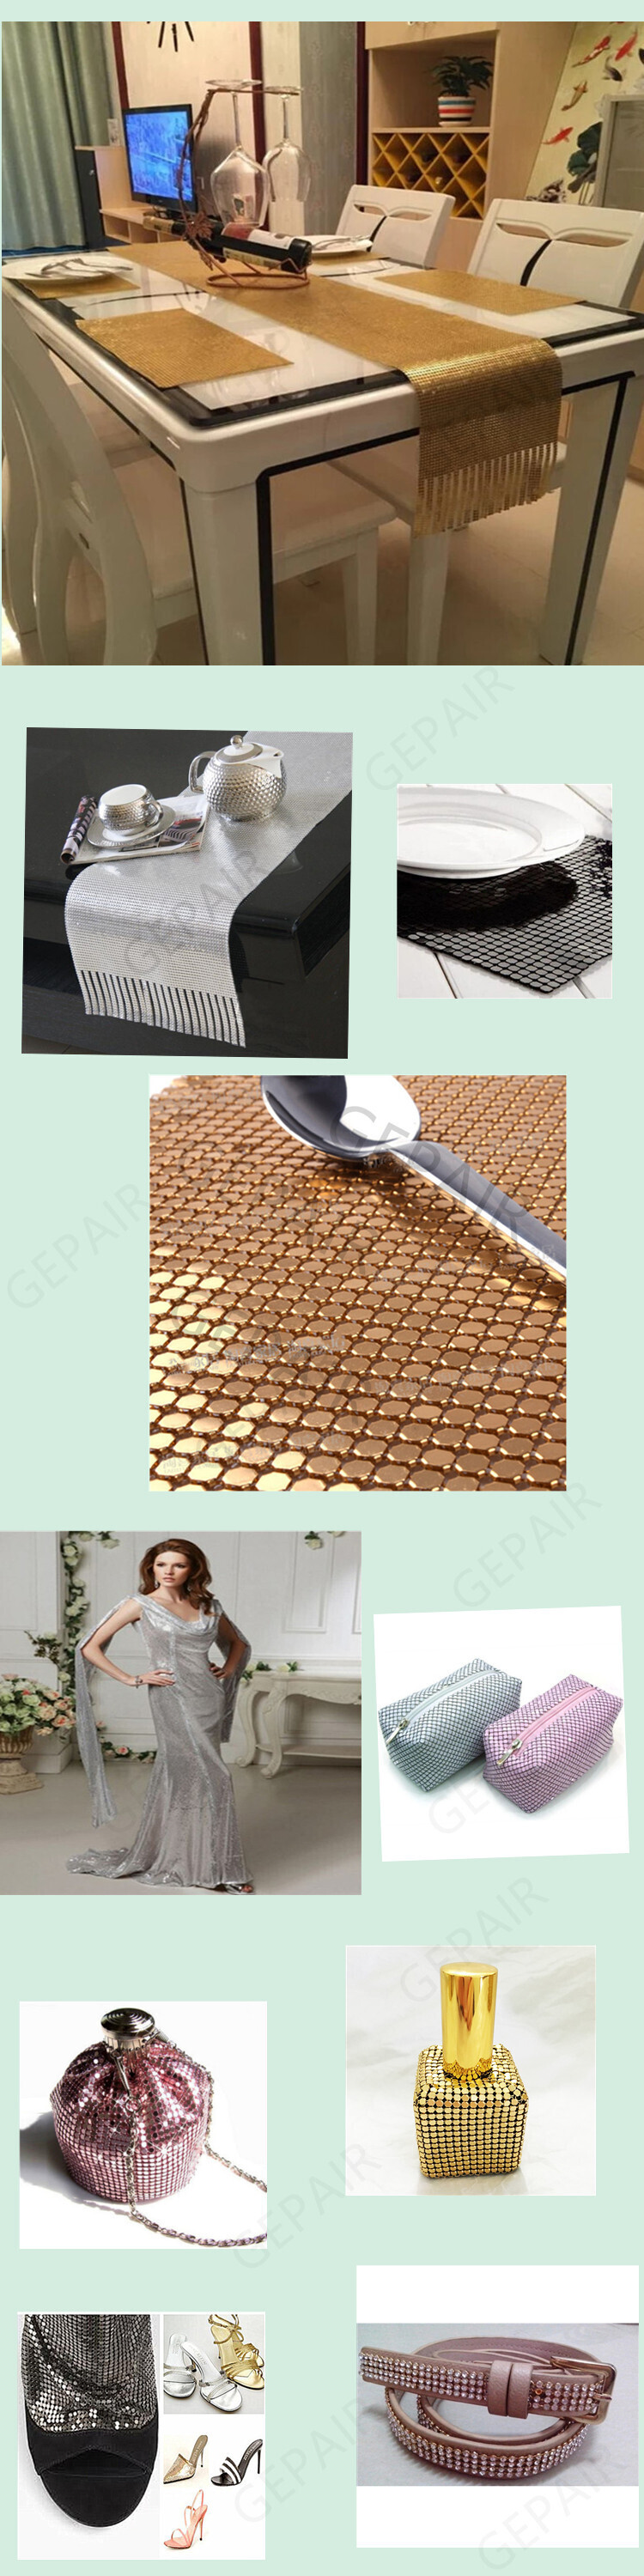 Gold metal mesh sequin fabric with beads sequin